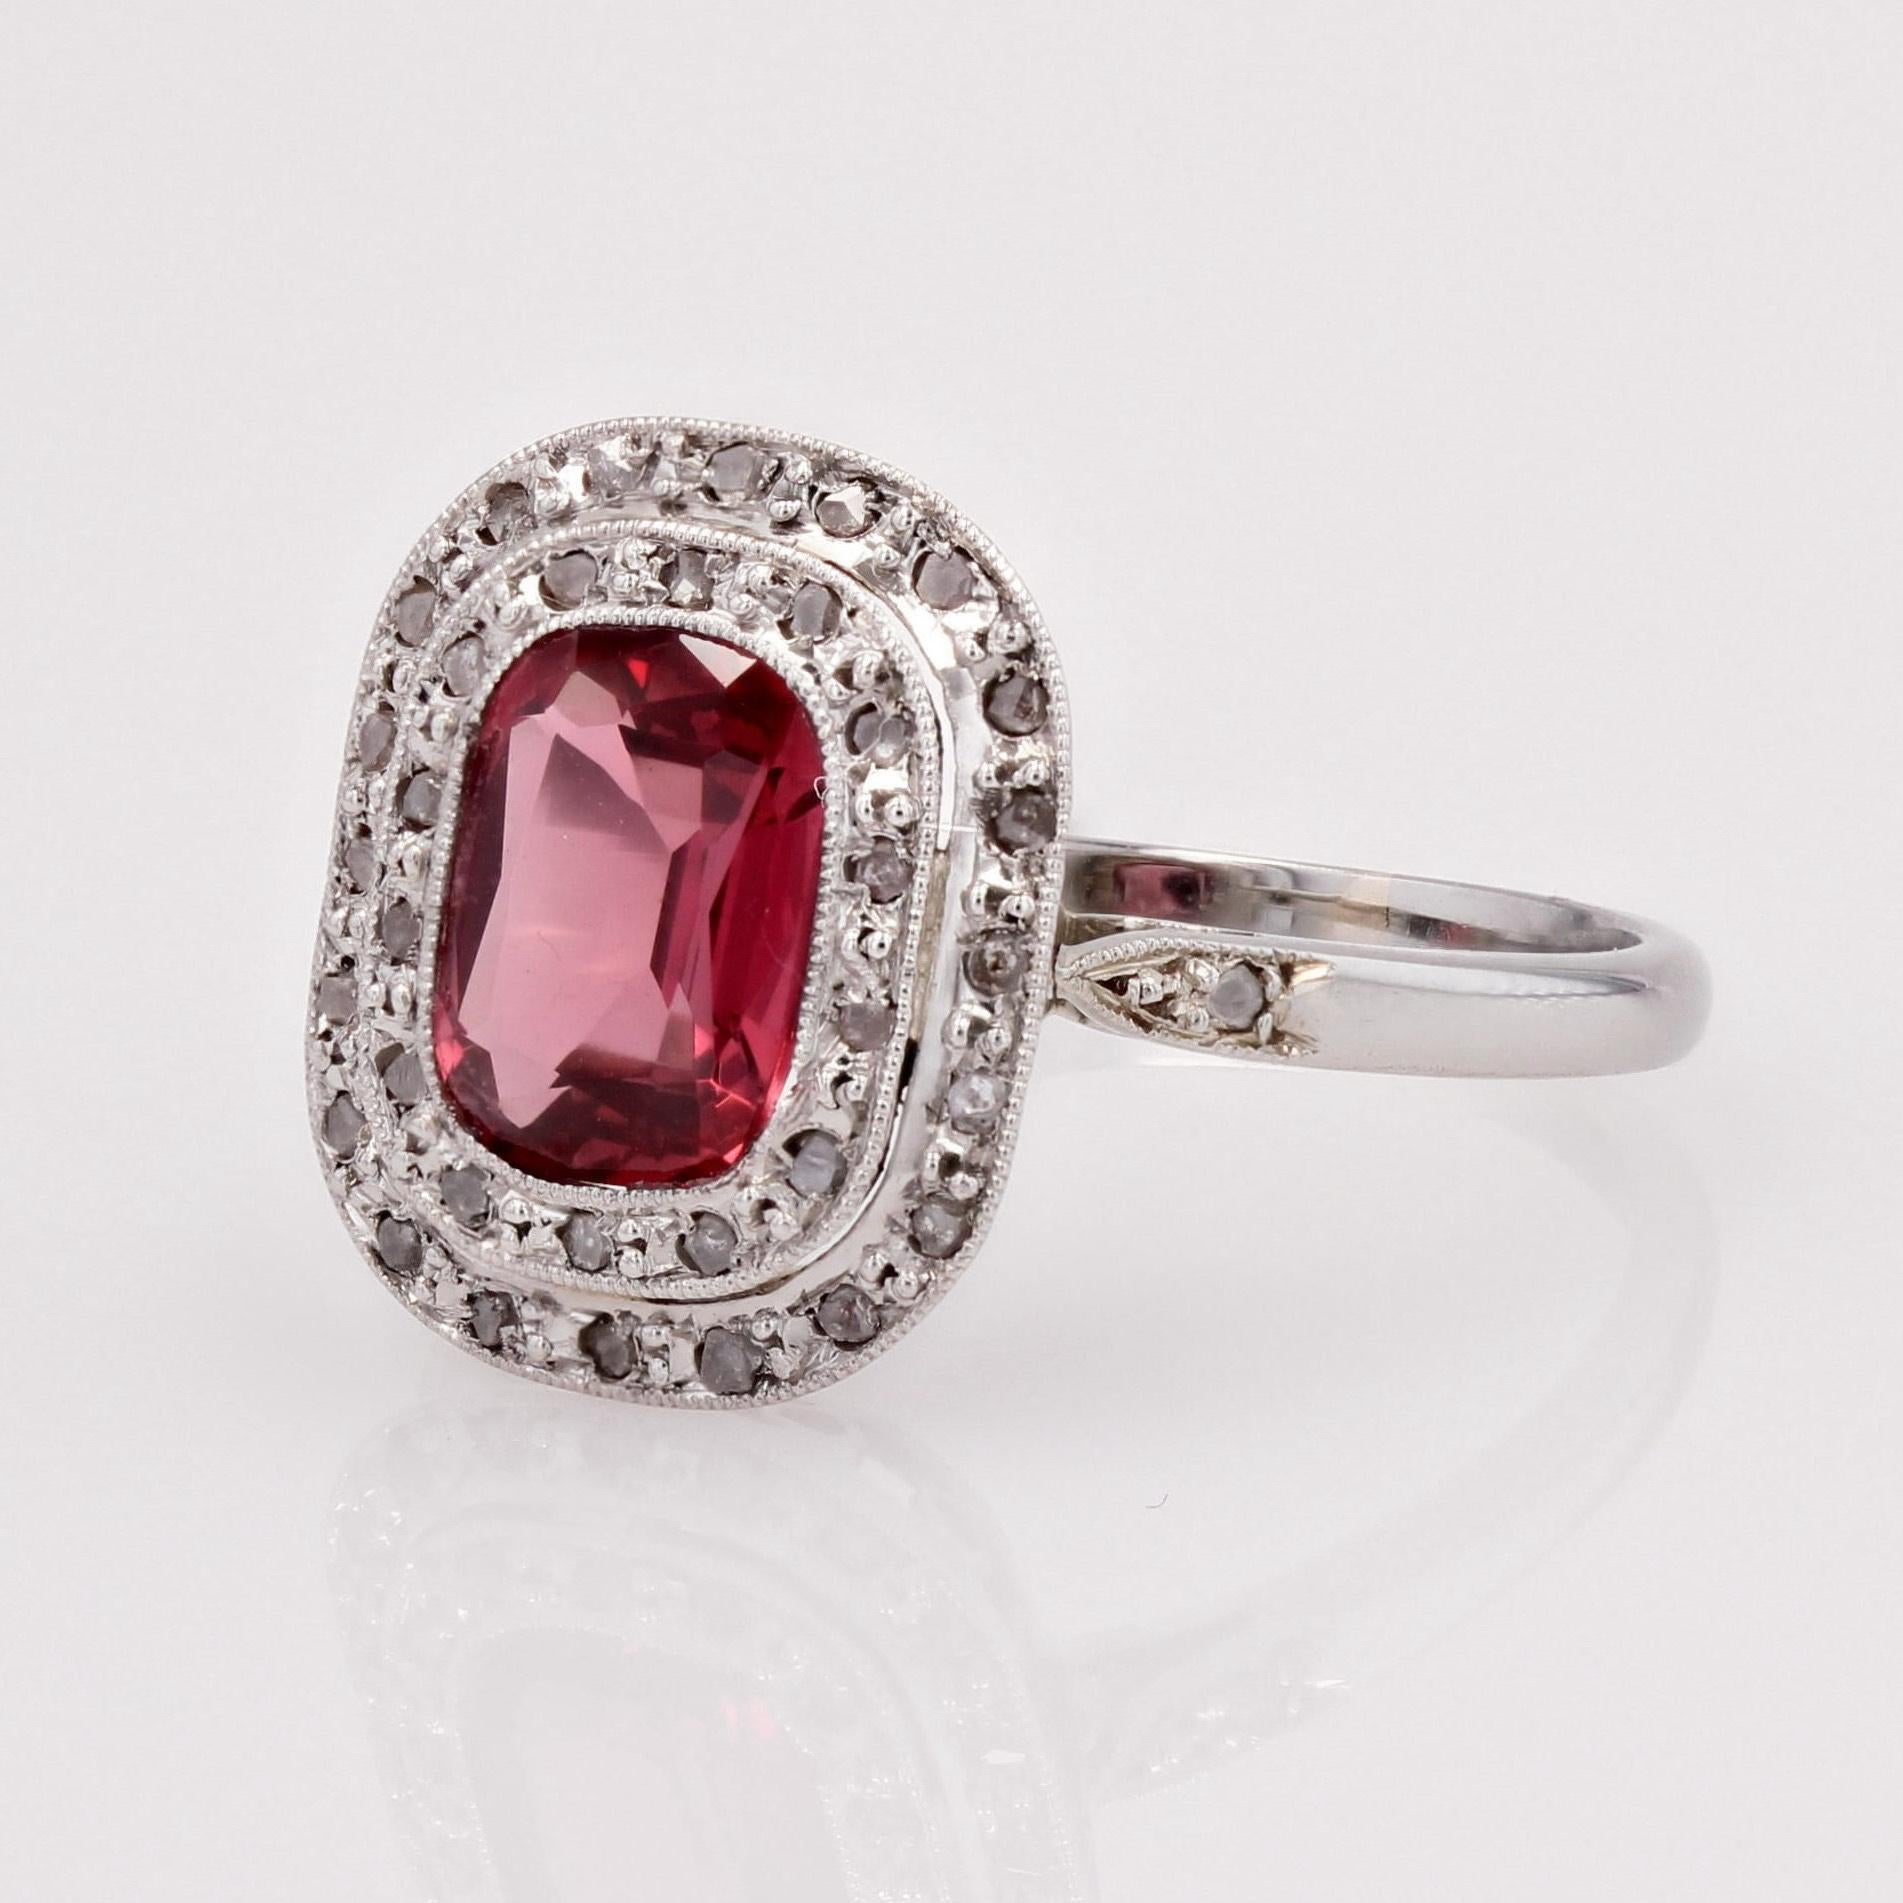 French 1930s 1.20 Carat Red Spinel Diamonds 18 Karat White Gold Ring For Sale 2